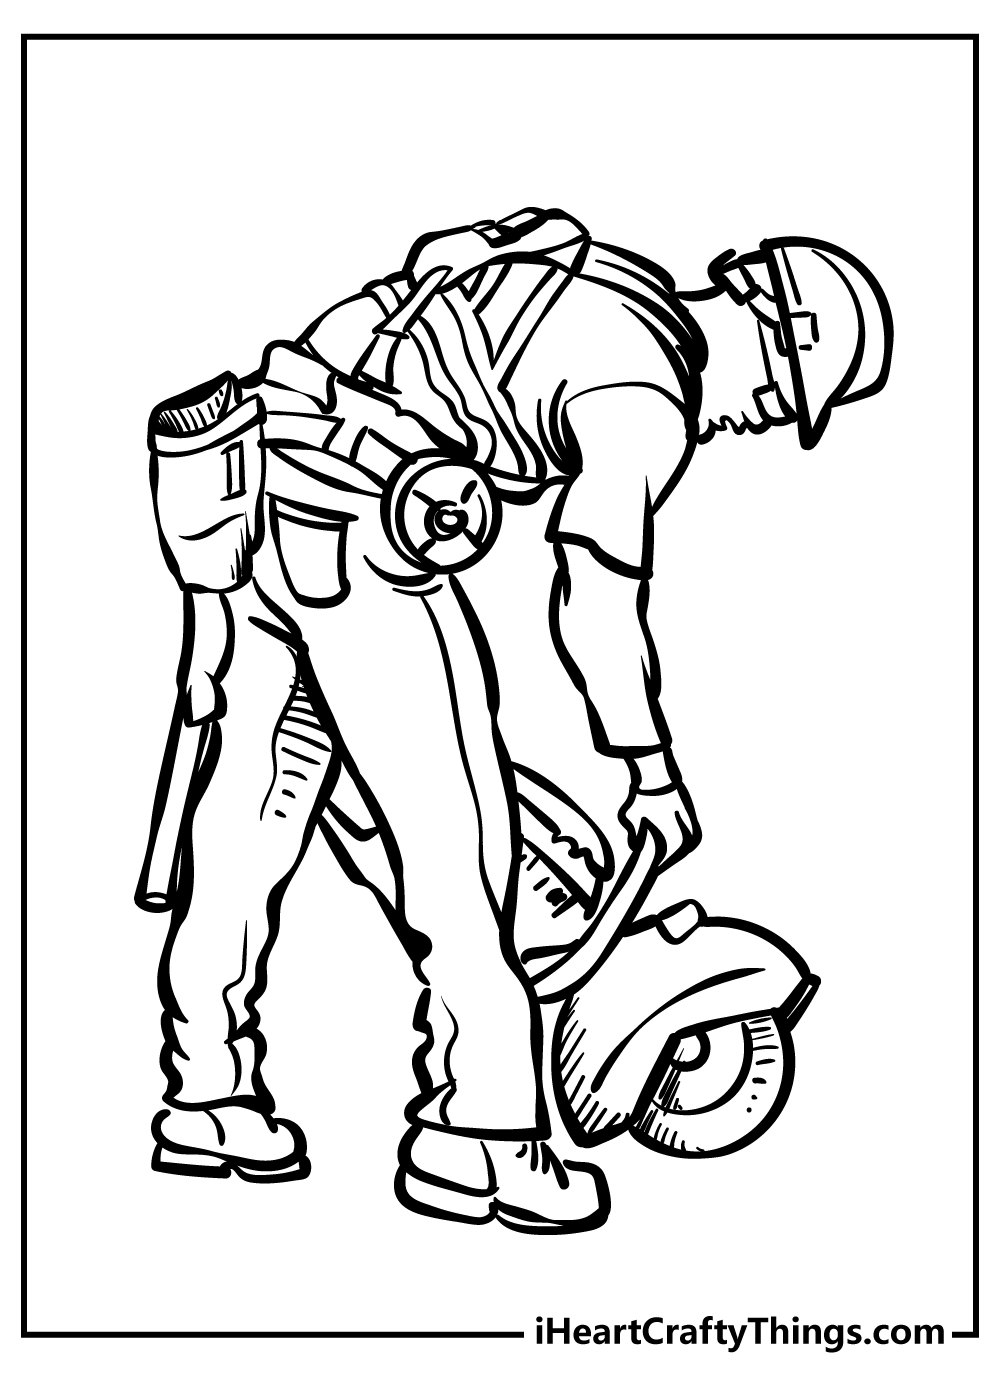 Construction Coloring Book for adults free download